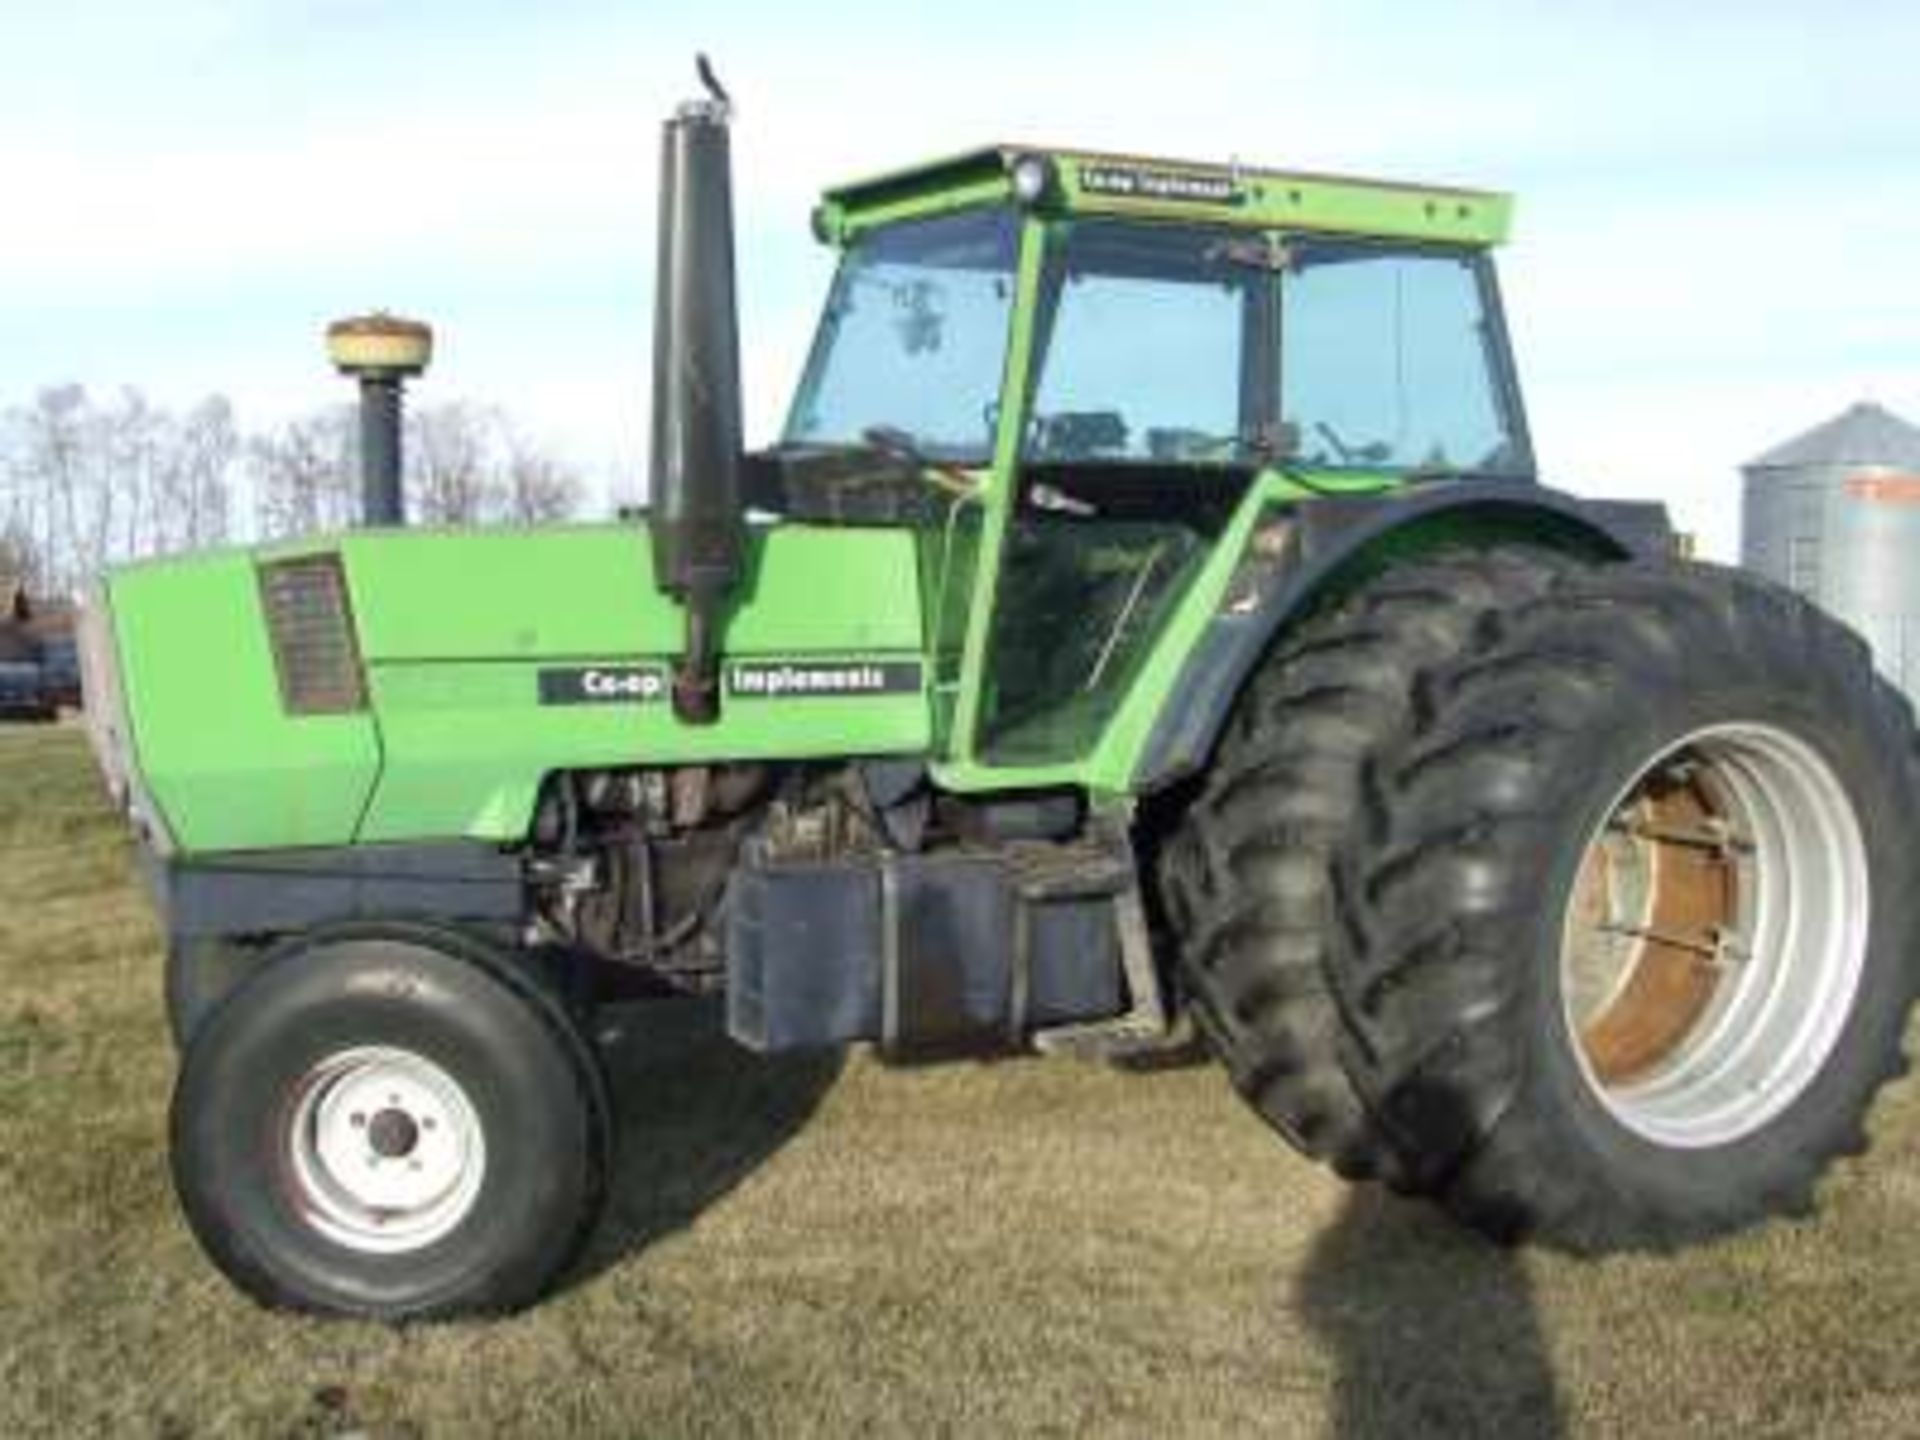 1982 Deutz DX 160 Tractor: cab, air, duel hyd, 20.8x38 duals, 6290 hours, nice - Image 2 of 3